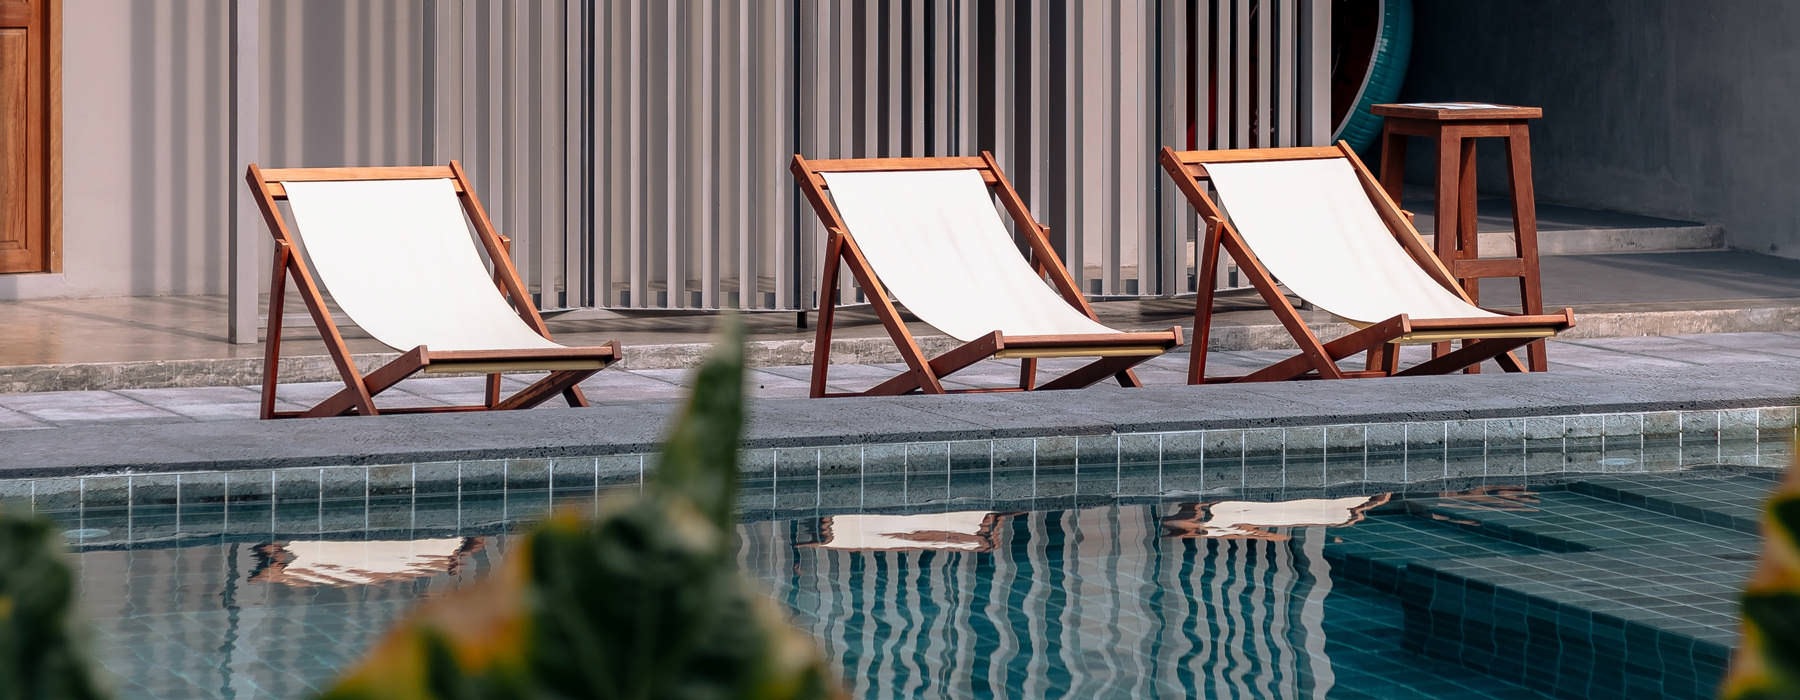 lounge chairs at swimming pool's ledge